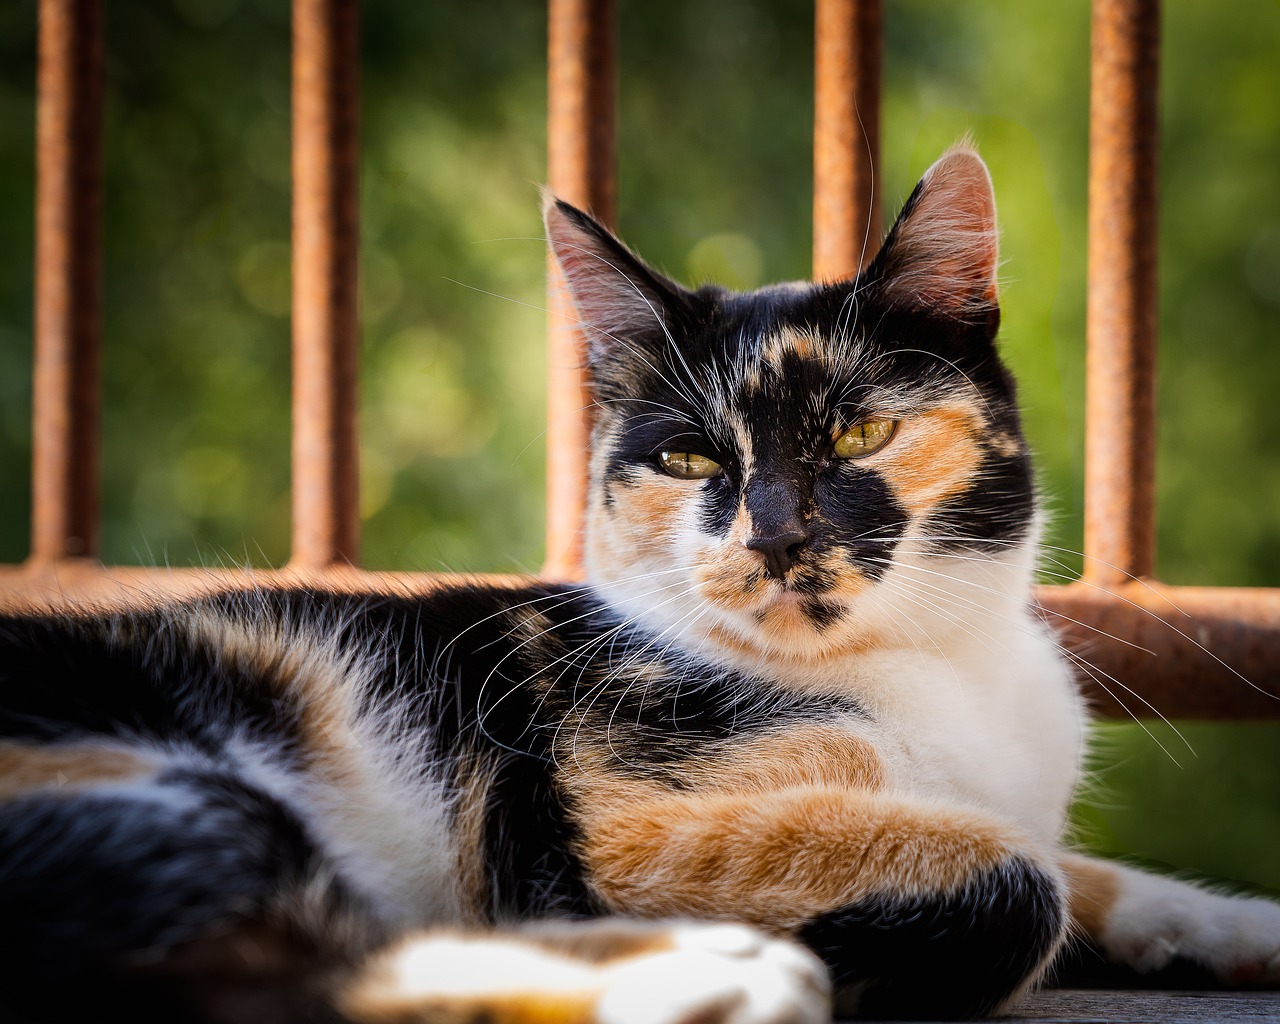 Calico Cat lounging outside